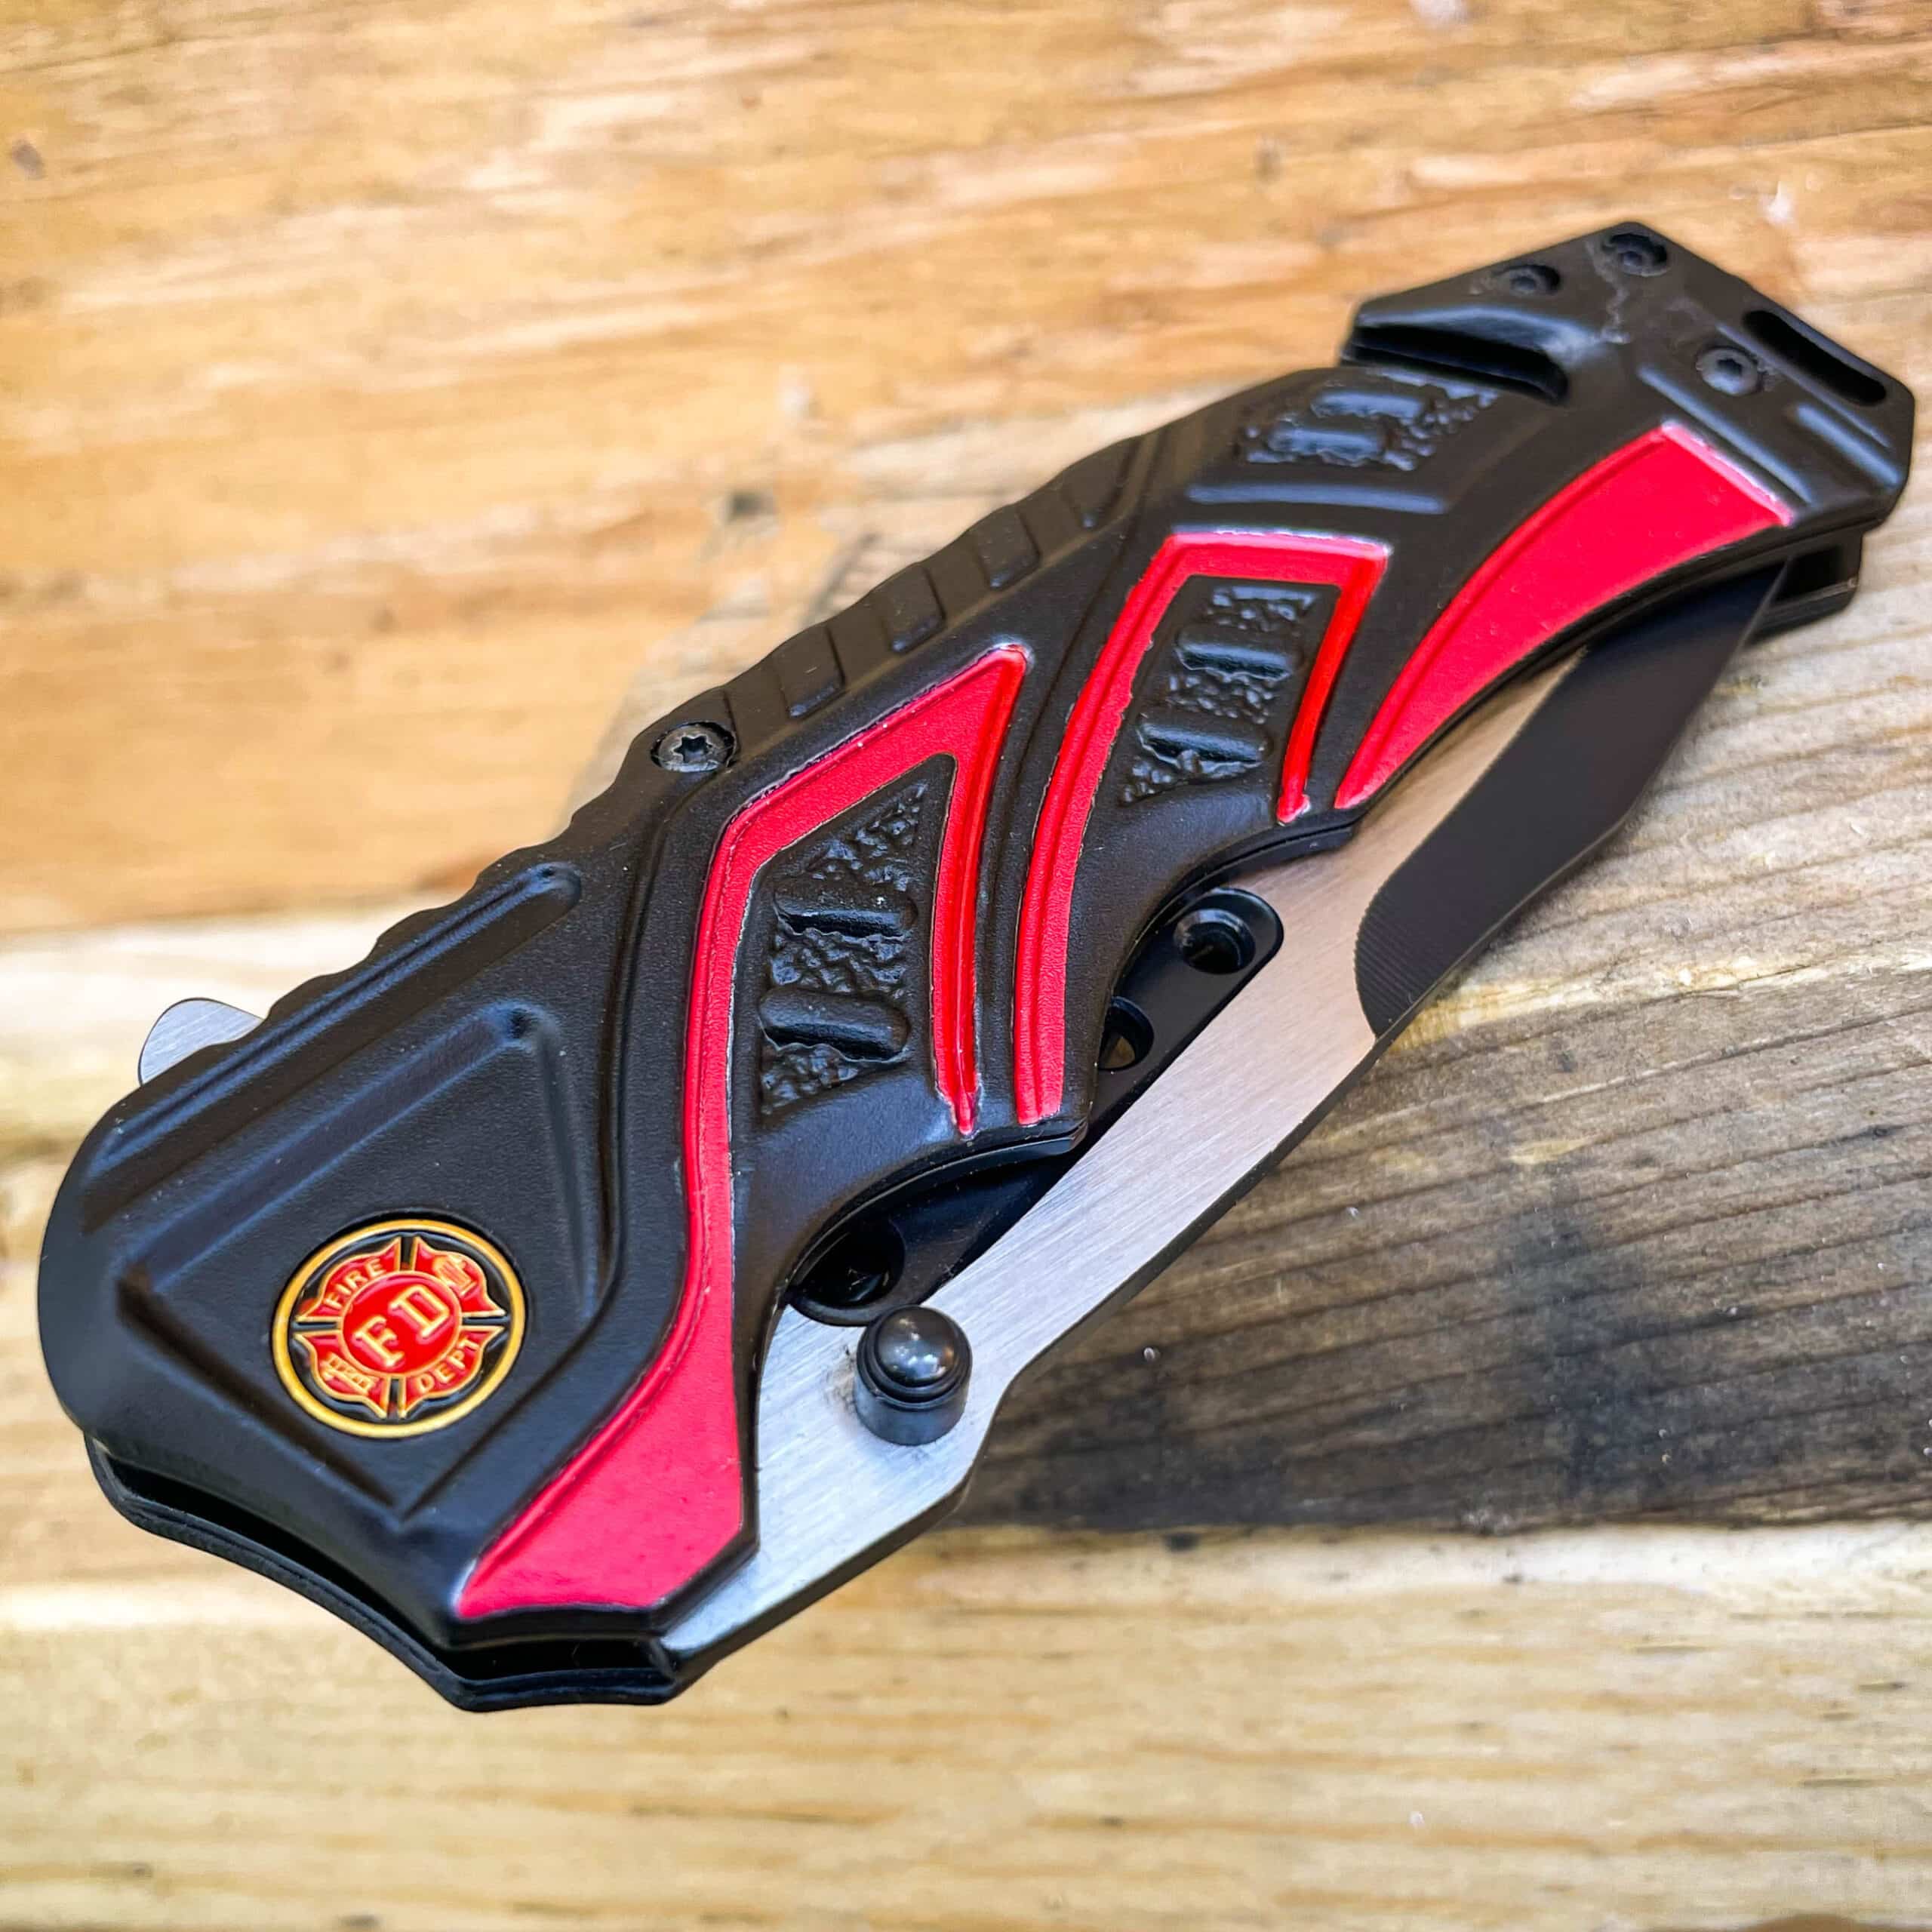 8.25" FIRE FIGHTER SPRING OPEN ASSISTED TACTICAL RESCUE FOLDING POCKET KNIFE RED